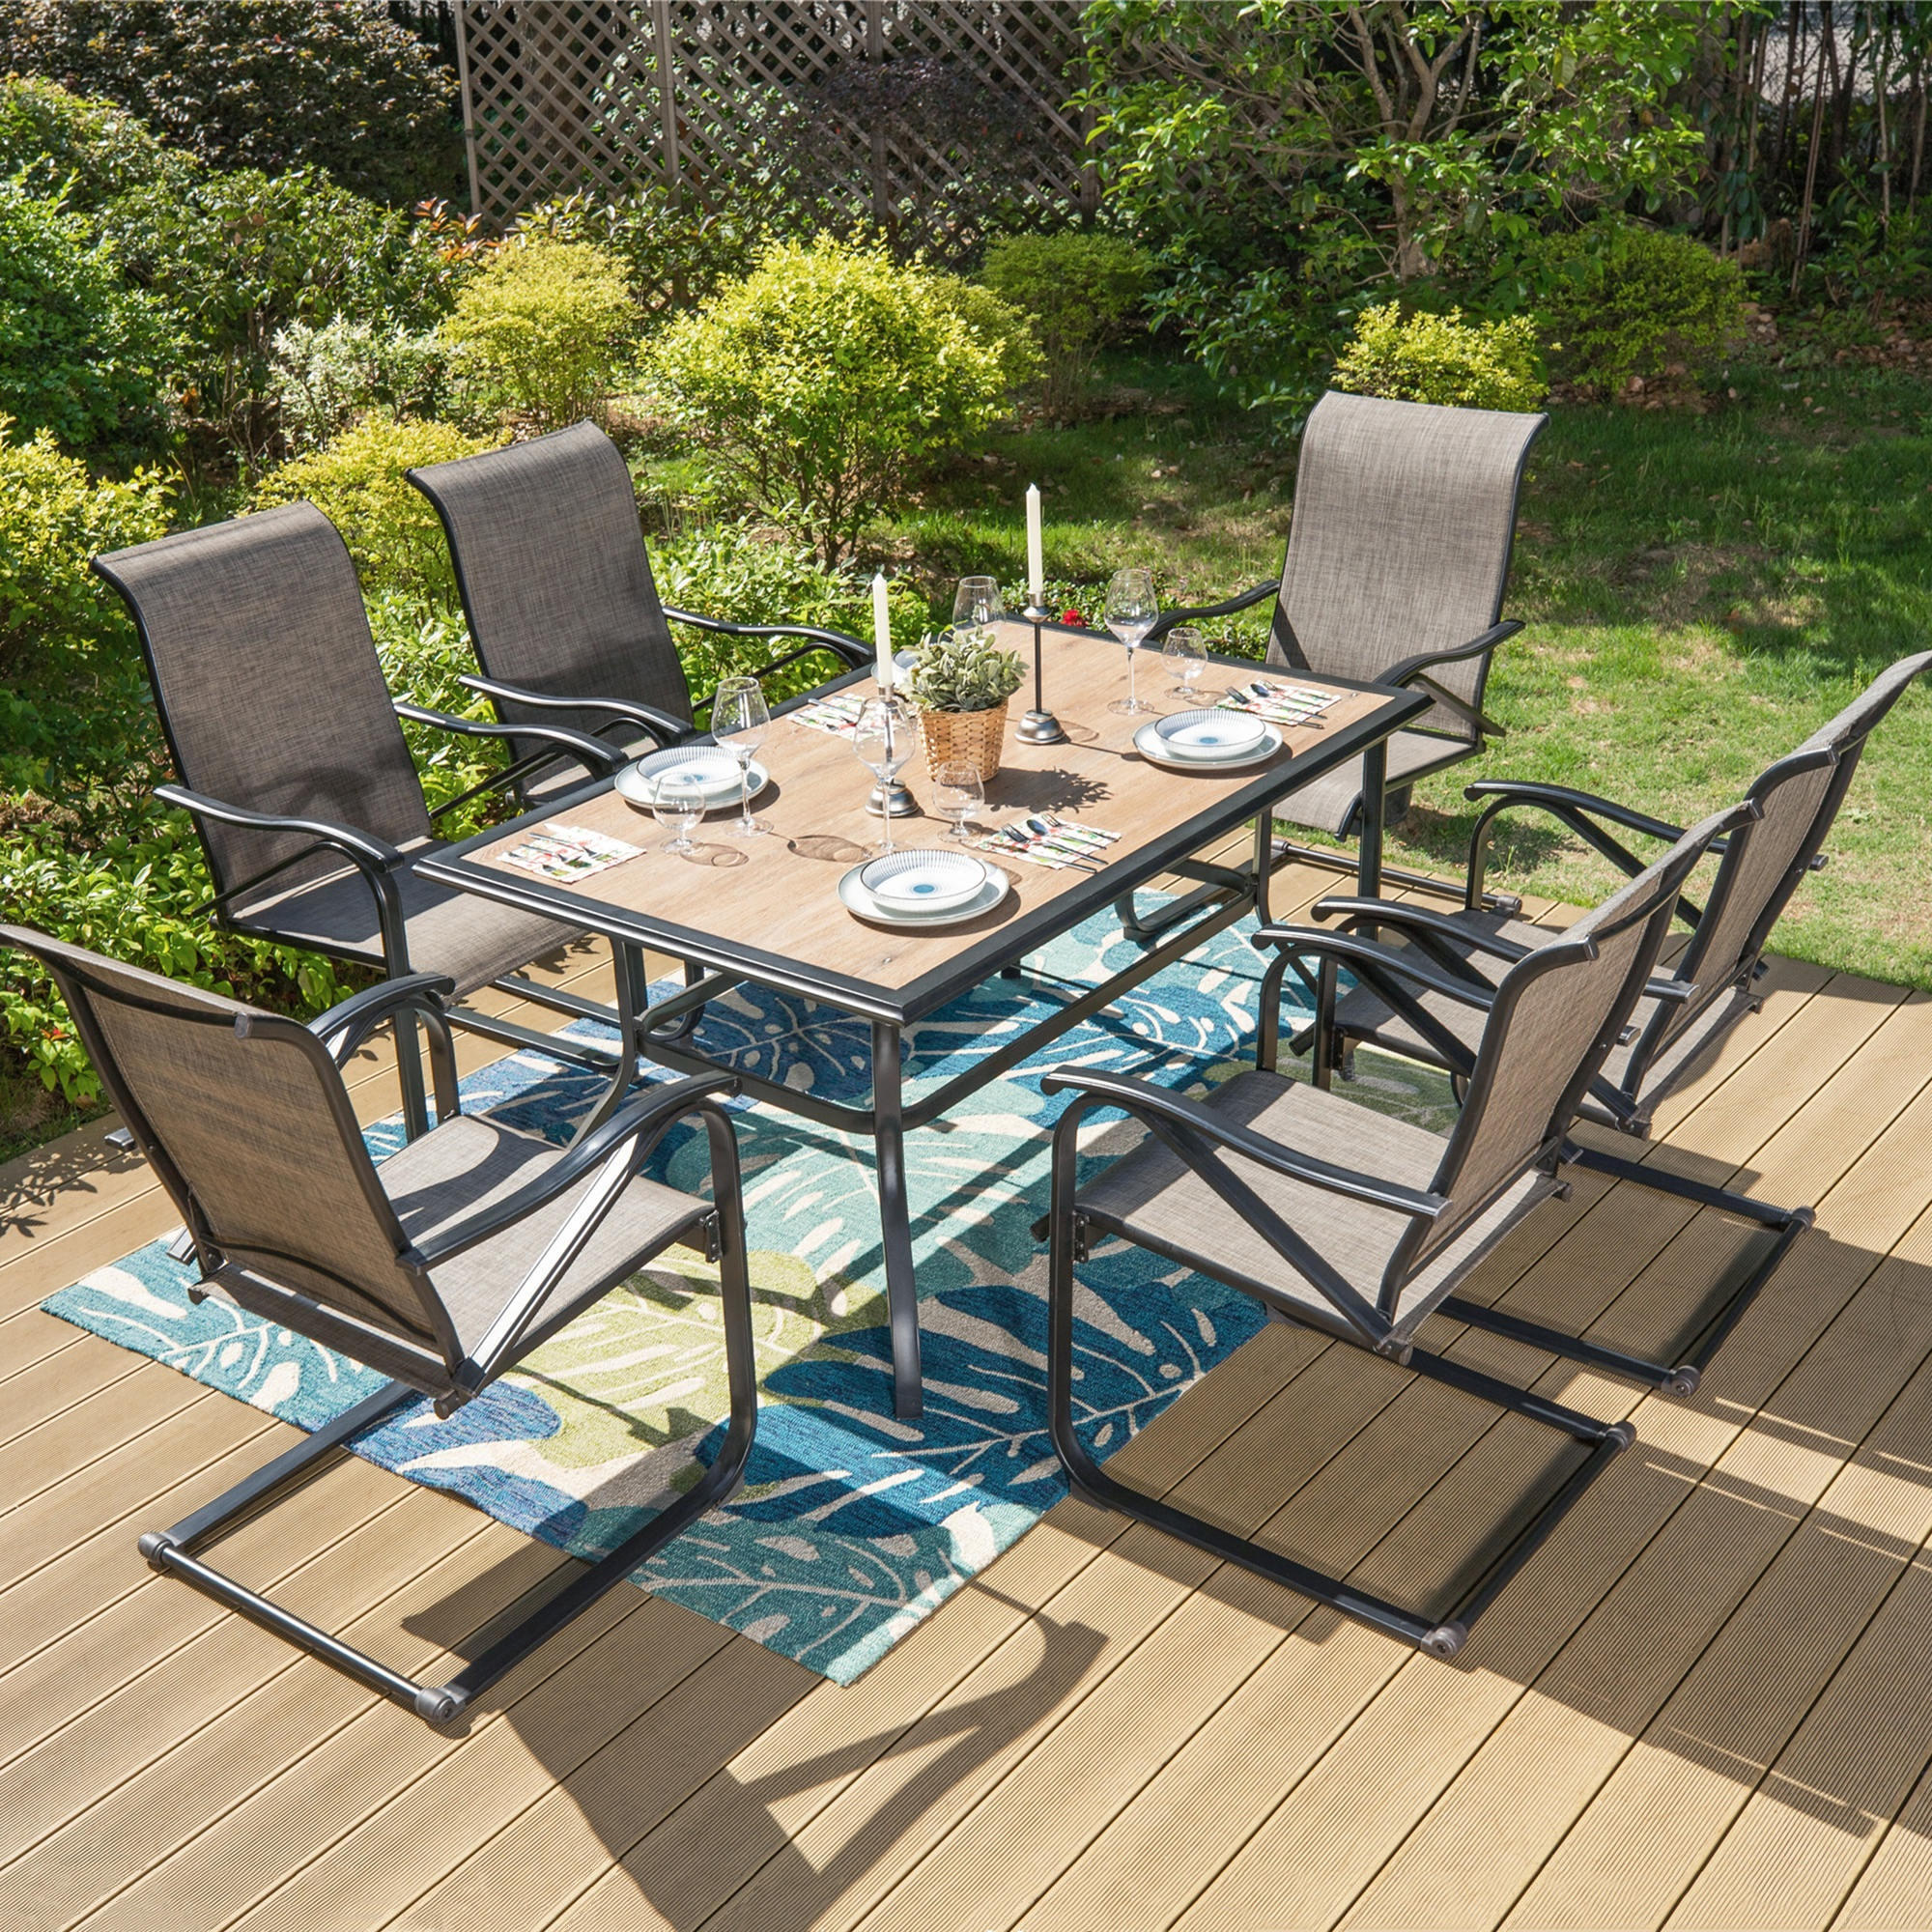 MF Studio 2-Piece Outdoor Patio C-spring Dining Chairs,Metal Rocking Frame with Textilene Seat,Gray&Black - image 3 of 12